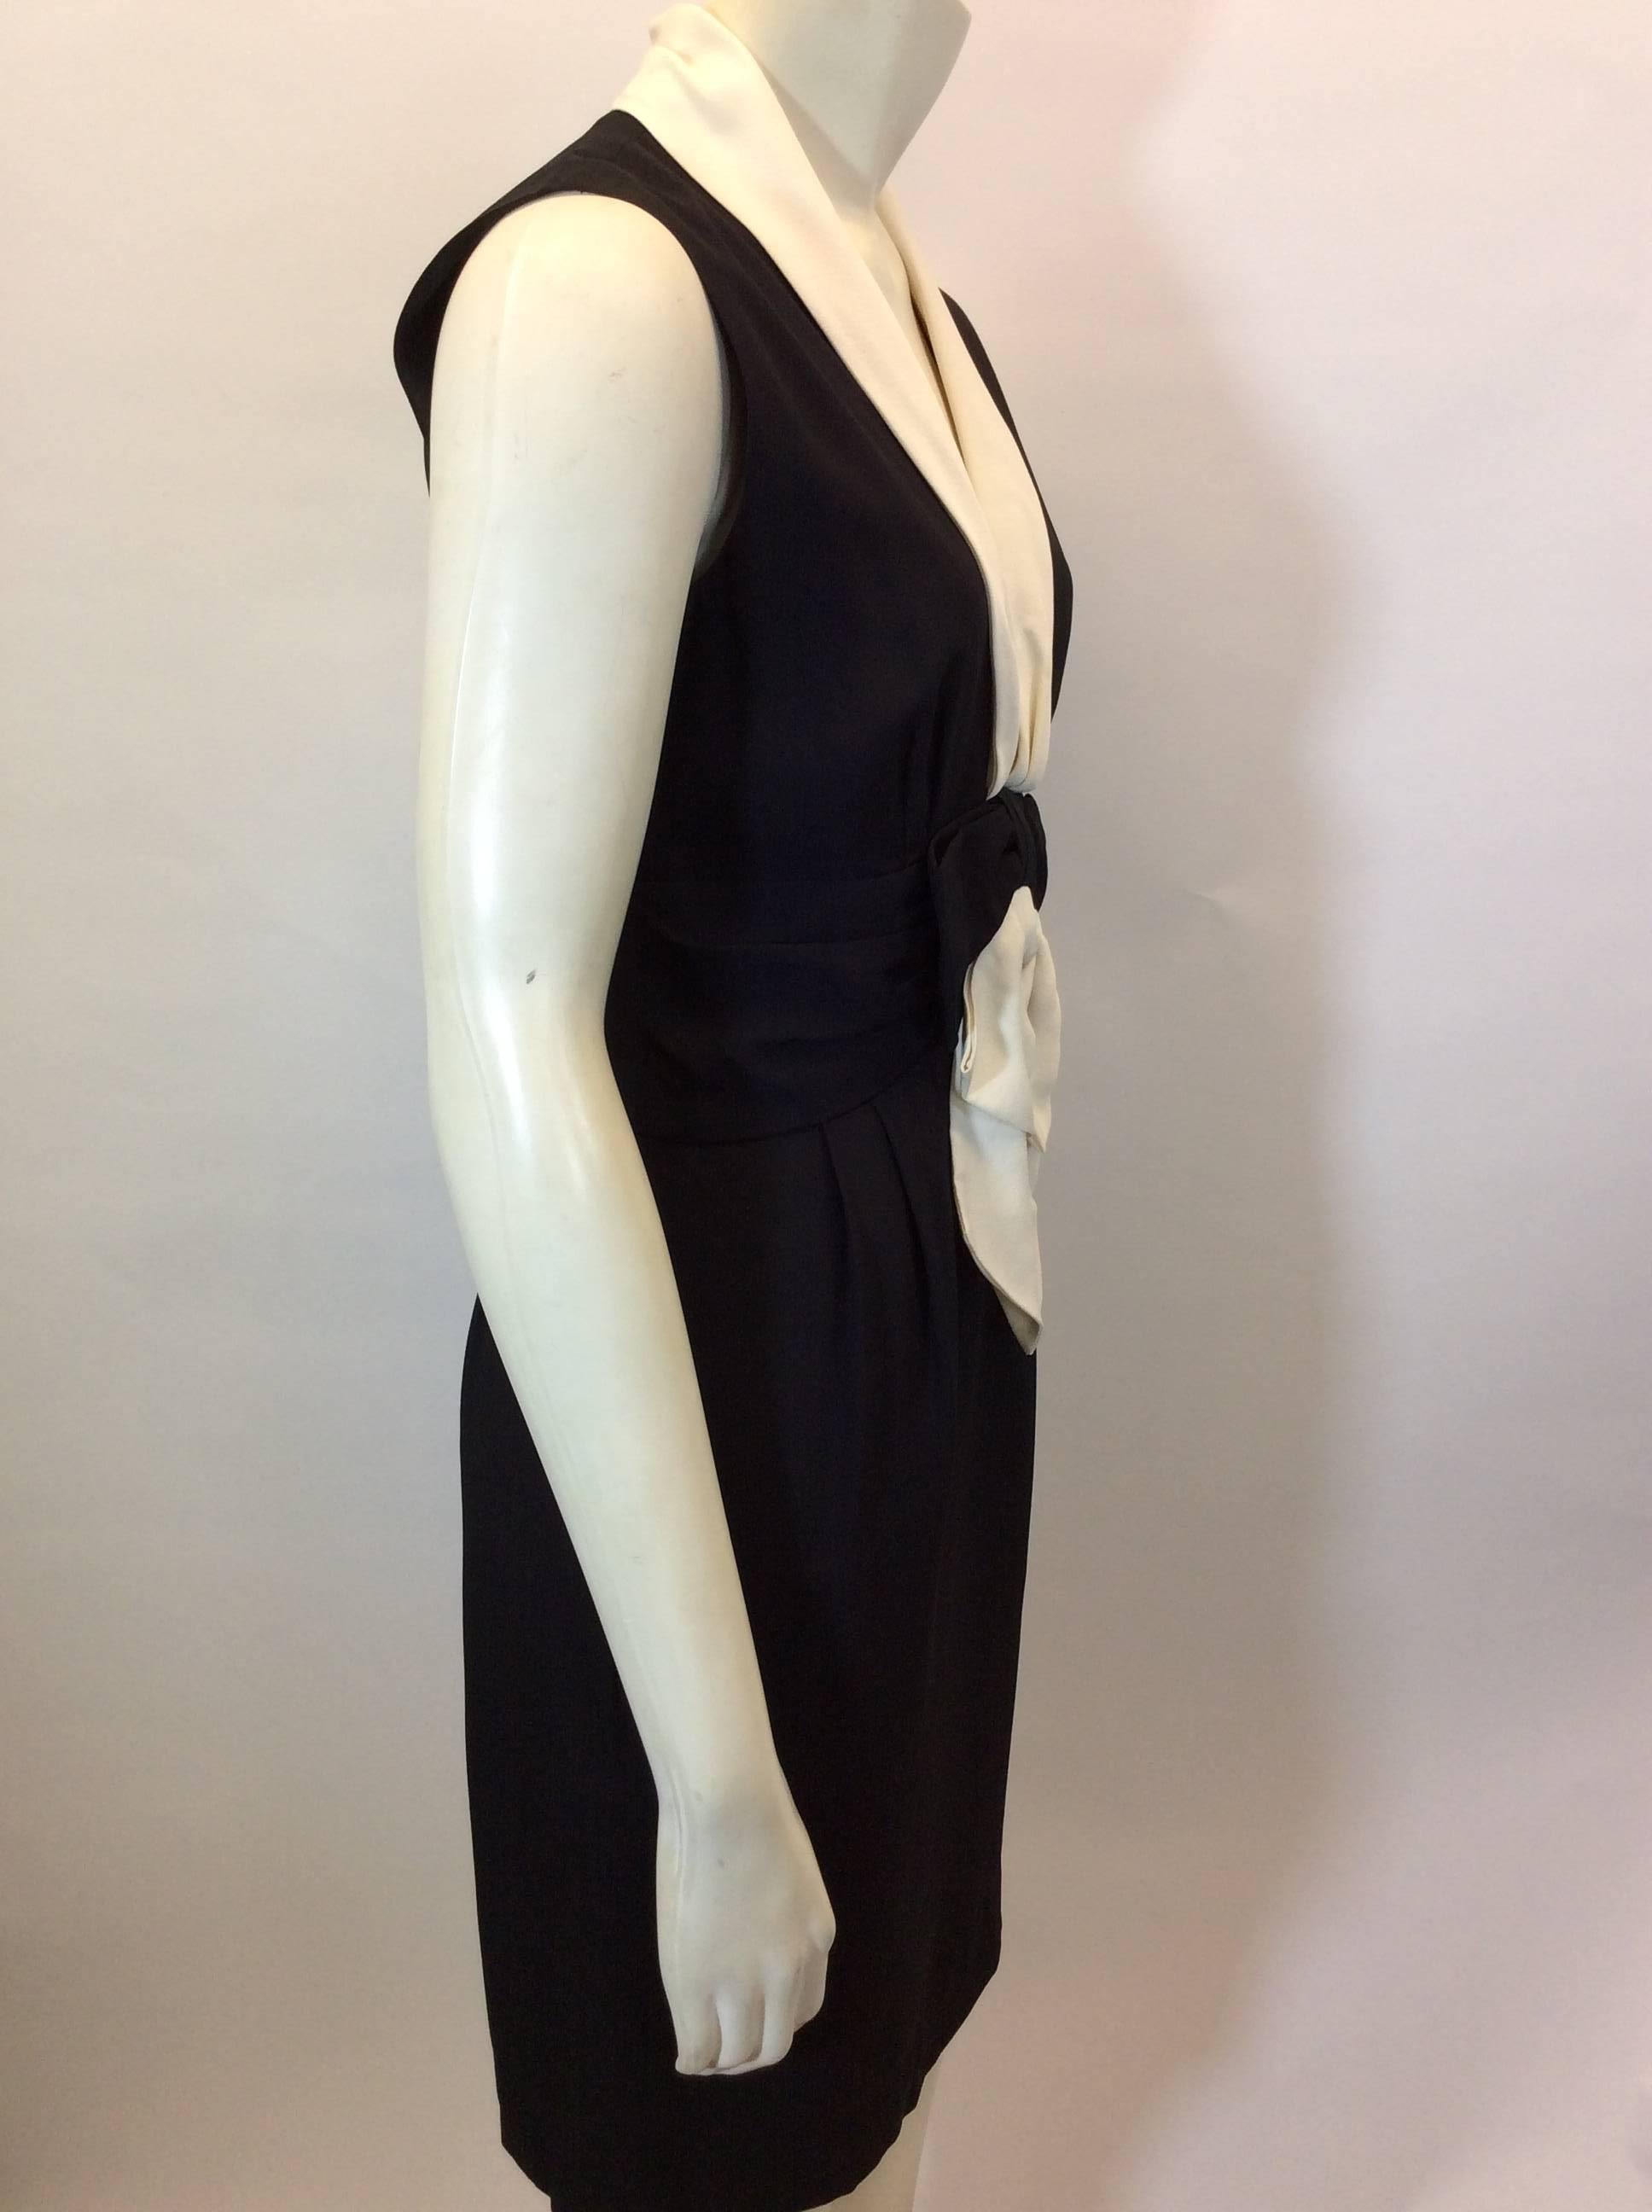 Black Sheath Dress with White Bow Detail
Side zipper closure
White collar and bow detail below waist
Black bow detail on waistband
Pleated waist detail
Size unknown (refer to measurements)
64% Silk, 36% Rayon